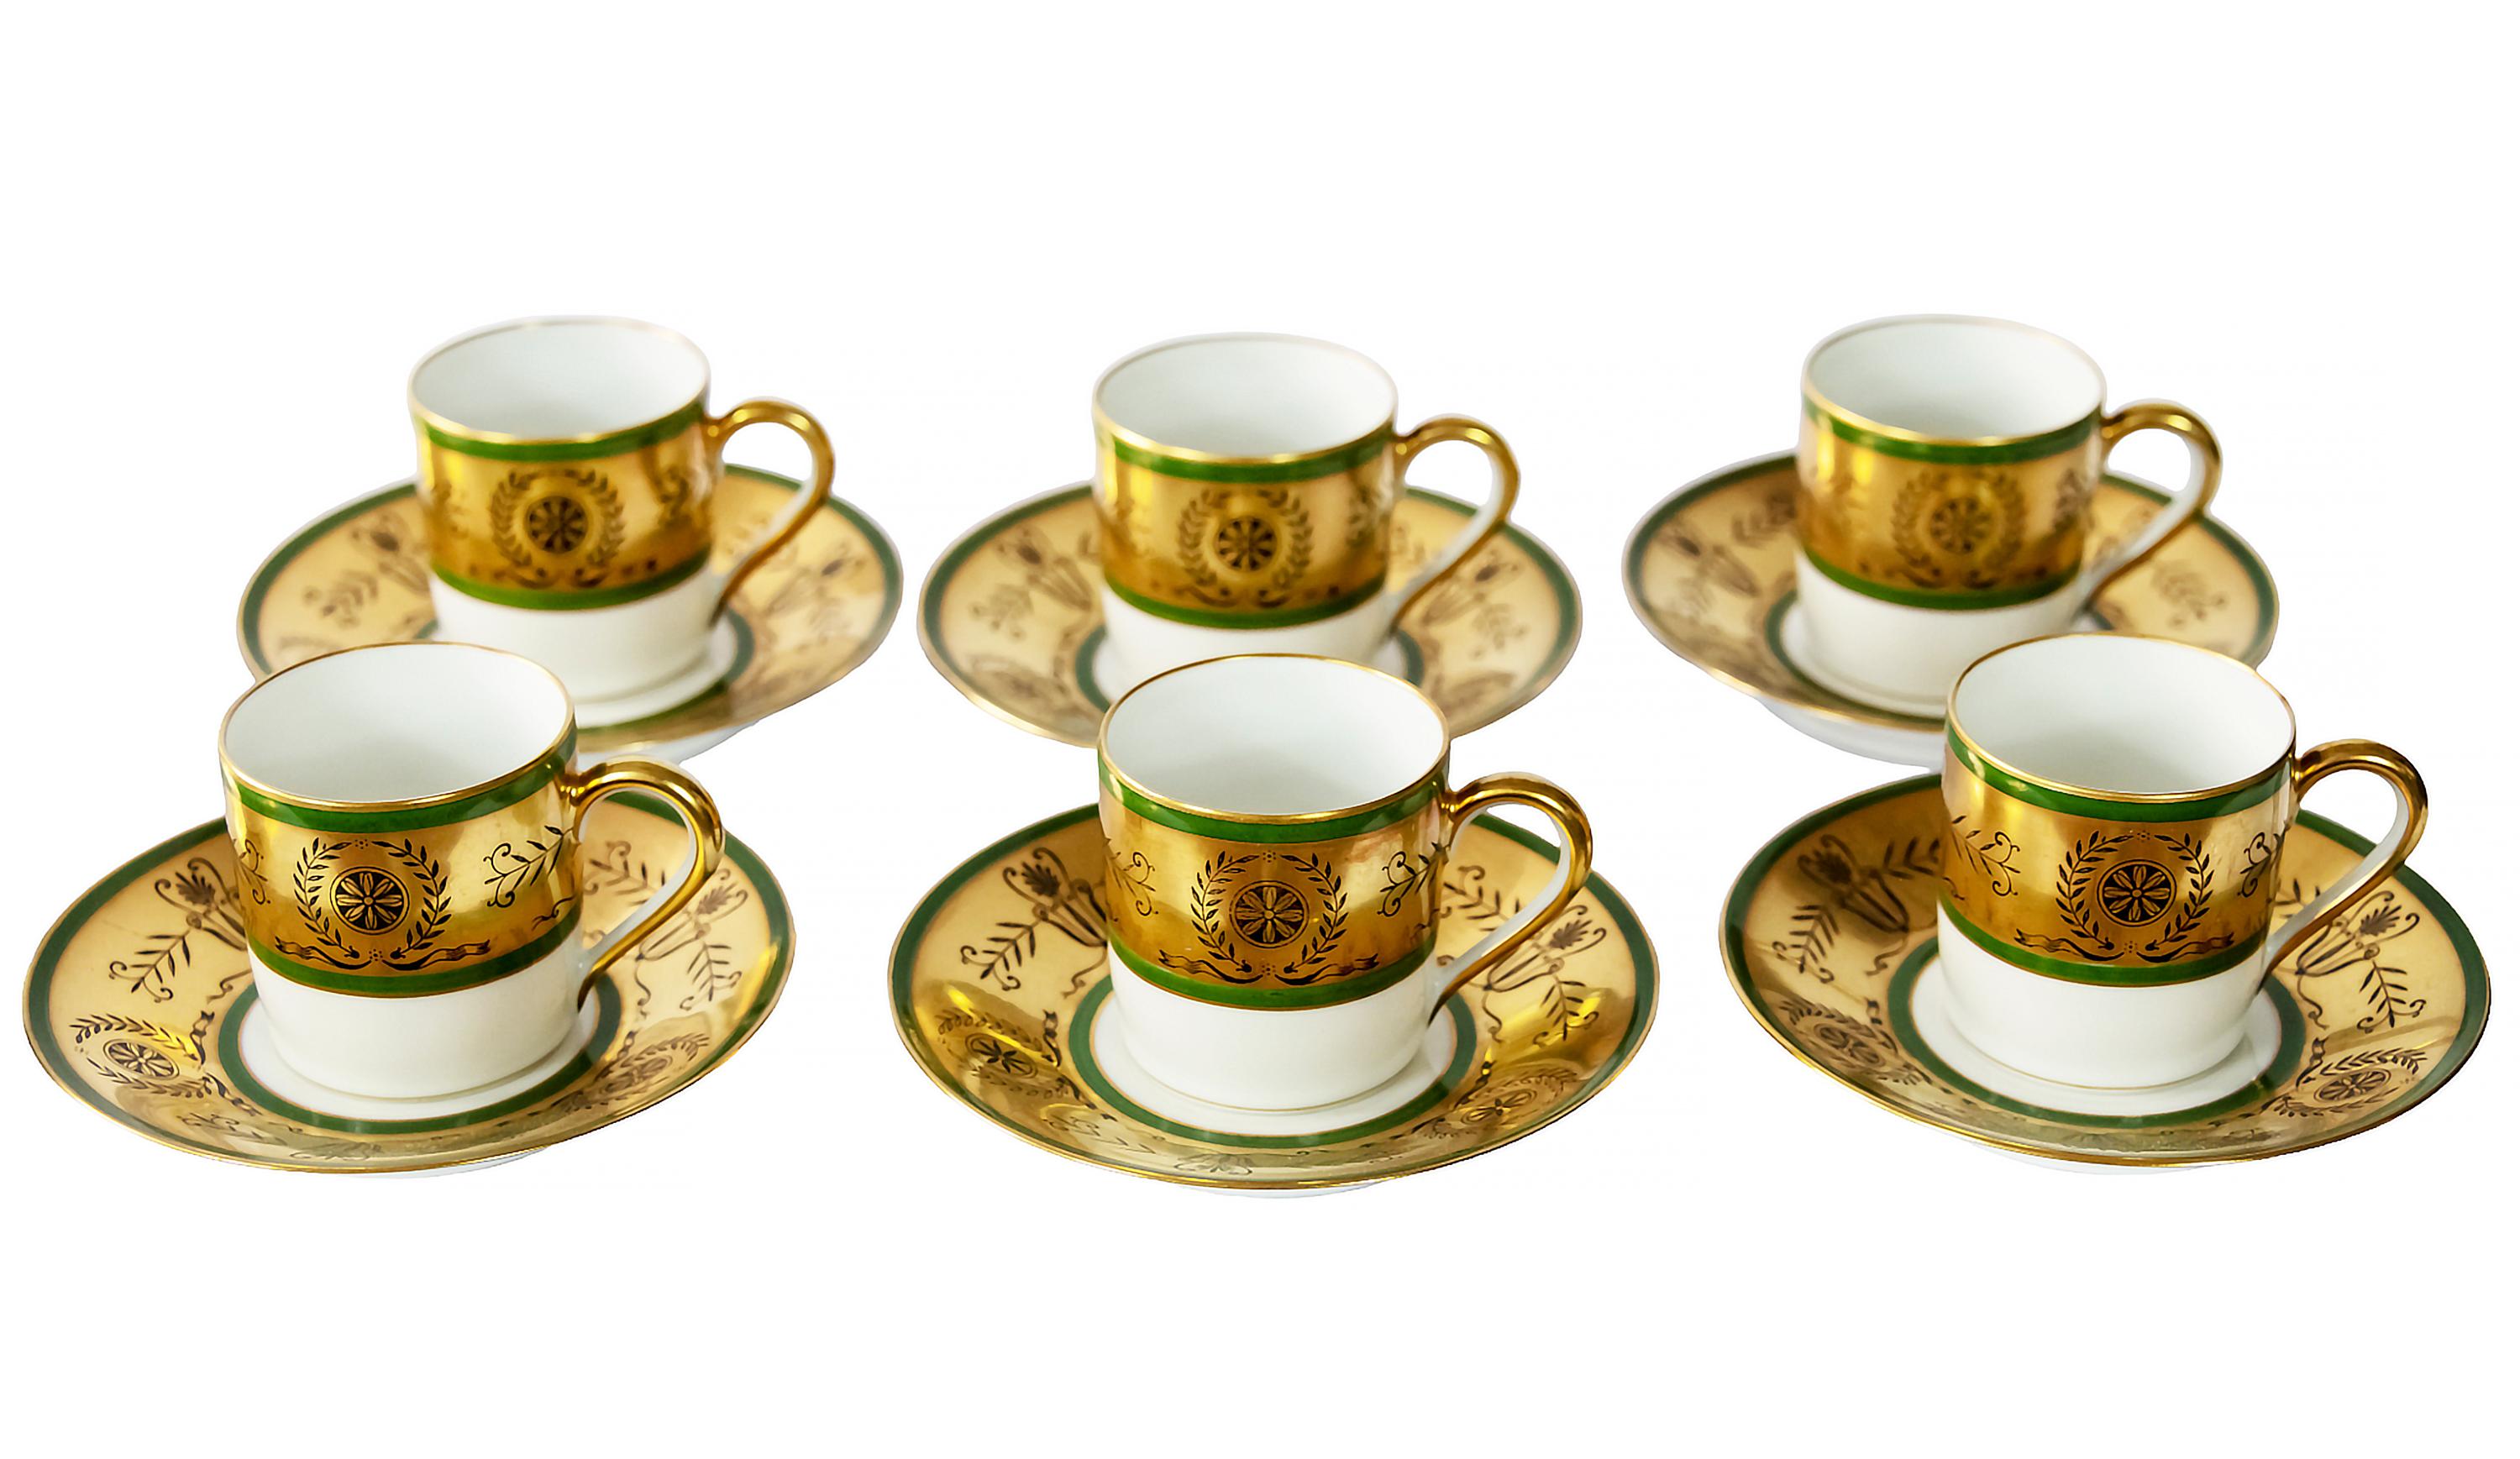 The set of 12 pcs. espresso cups by French Limoges porcelain in glazed porcelain decorated with green, black and gold decor.
Marked Limoges France.
Measures: Cup H 5.4 x 5.3 cm, saucer H 2 x 12.2 cm.
  